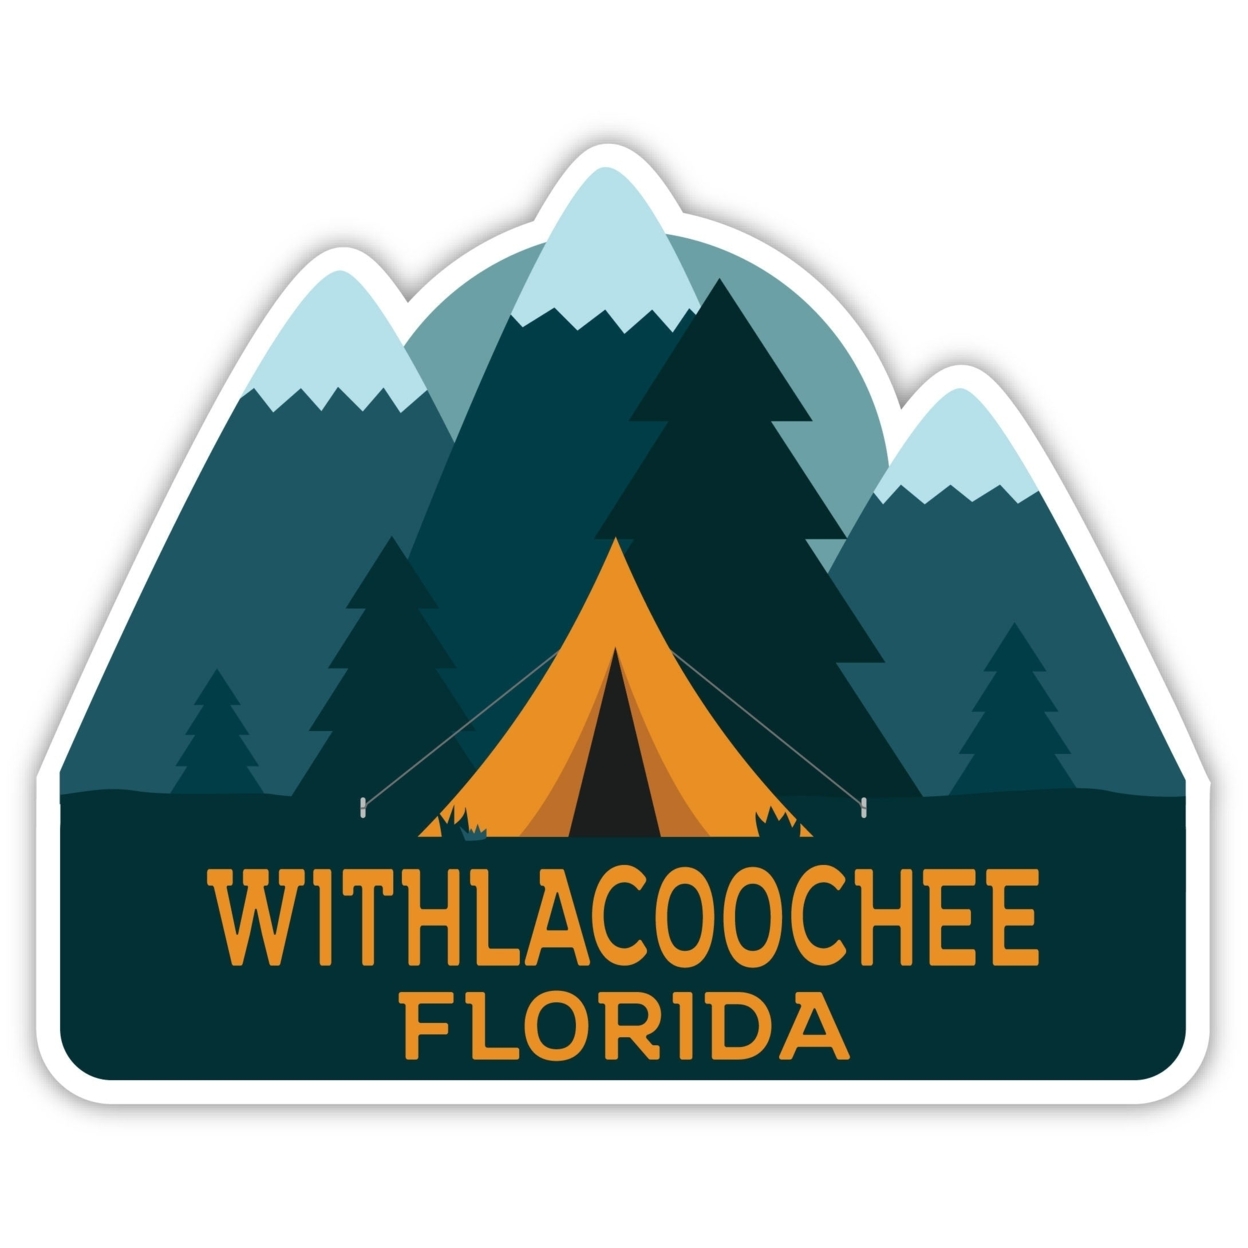 Withlacoochee Florida Souvenir Decorative Stickers (Choose Theme And Size) - Single Unit, 2-Inch, Tent